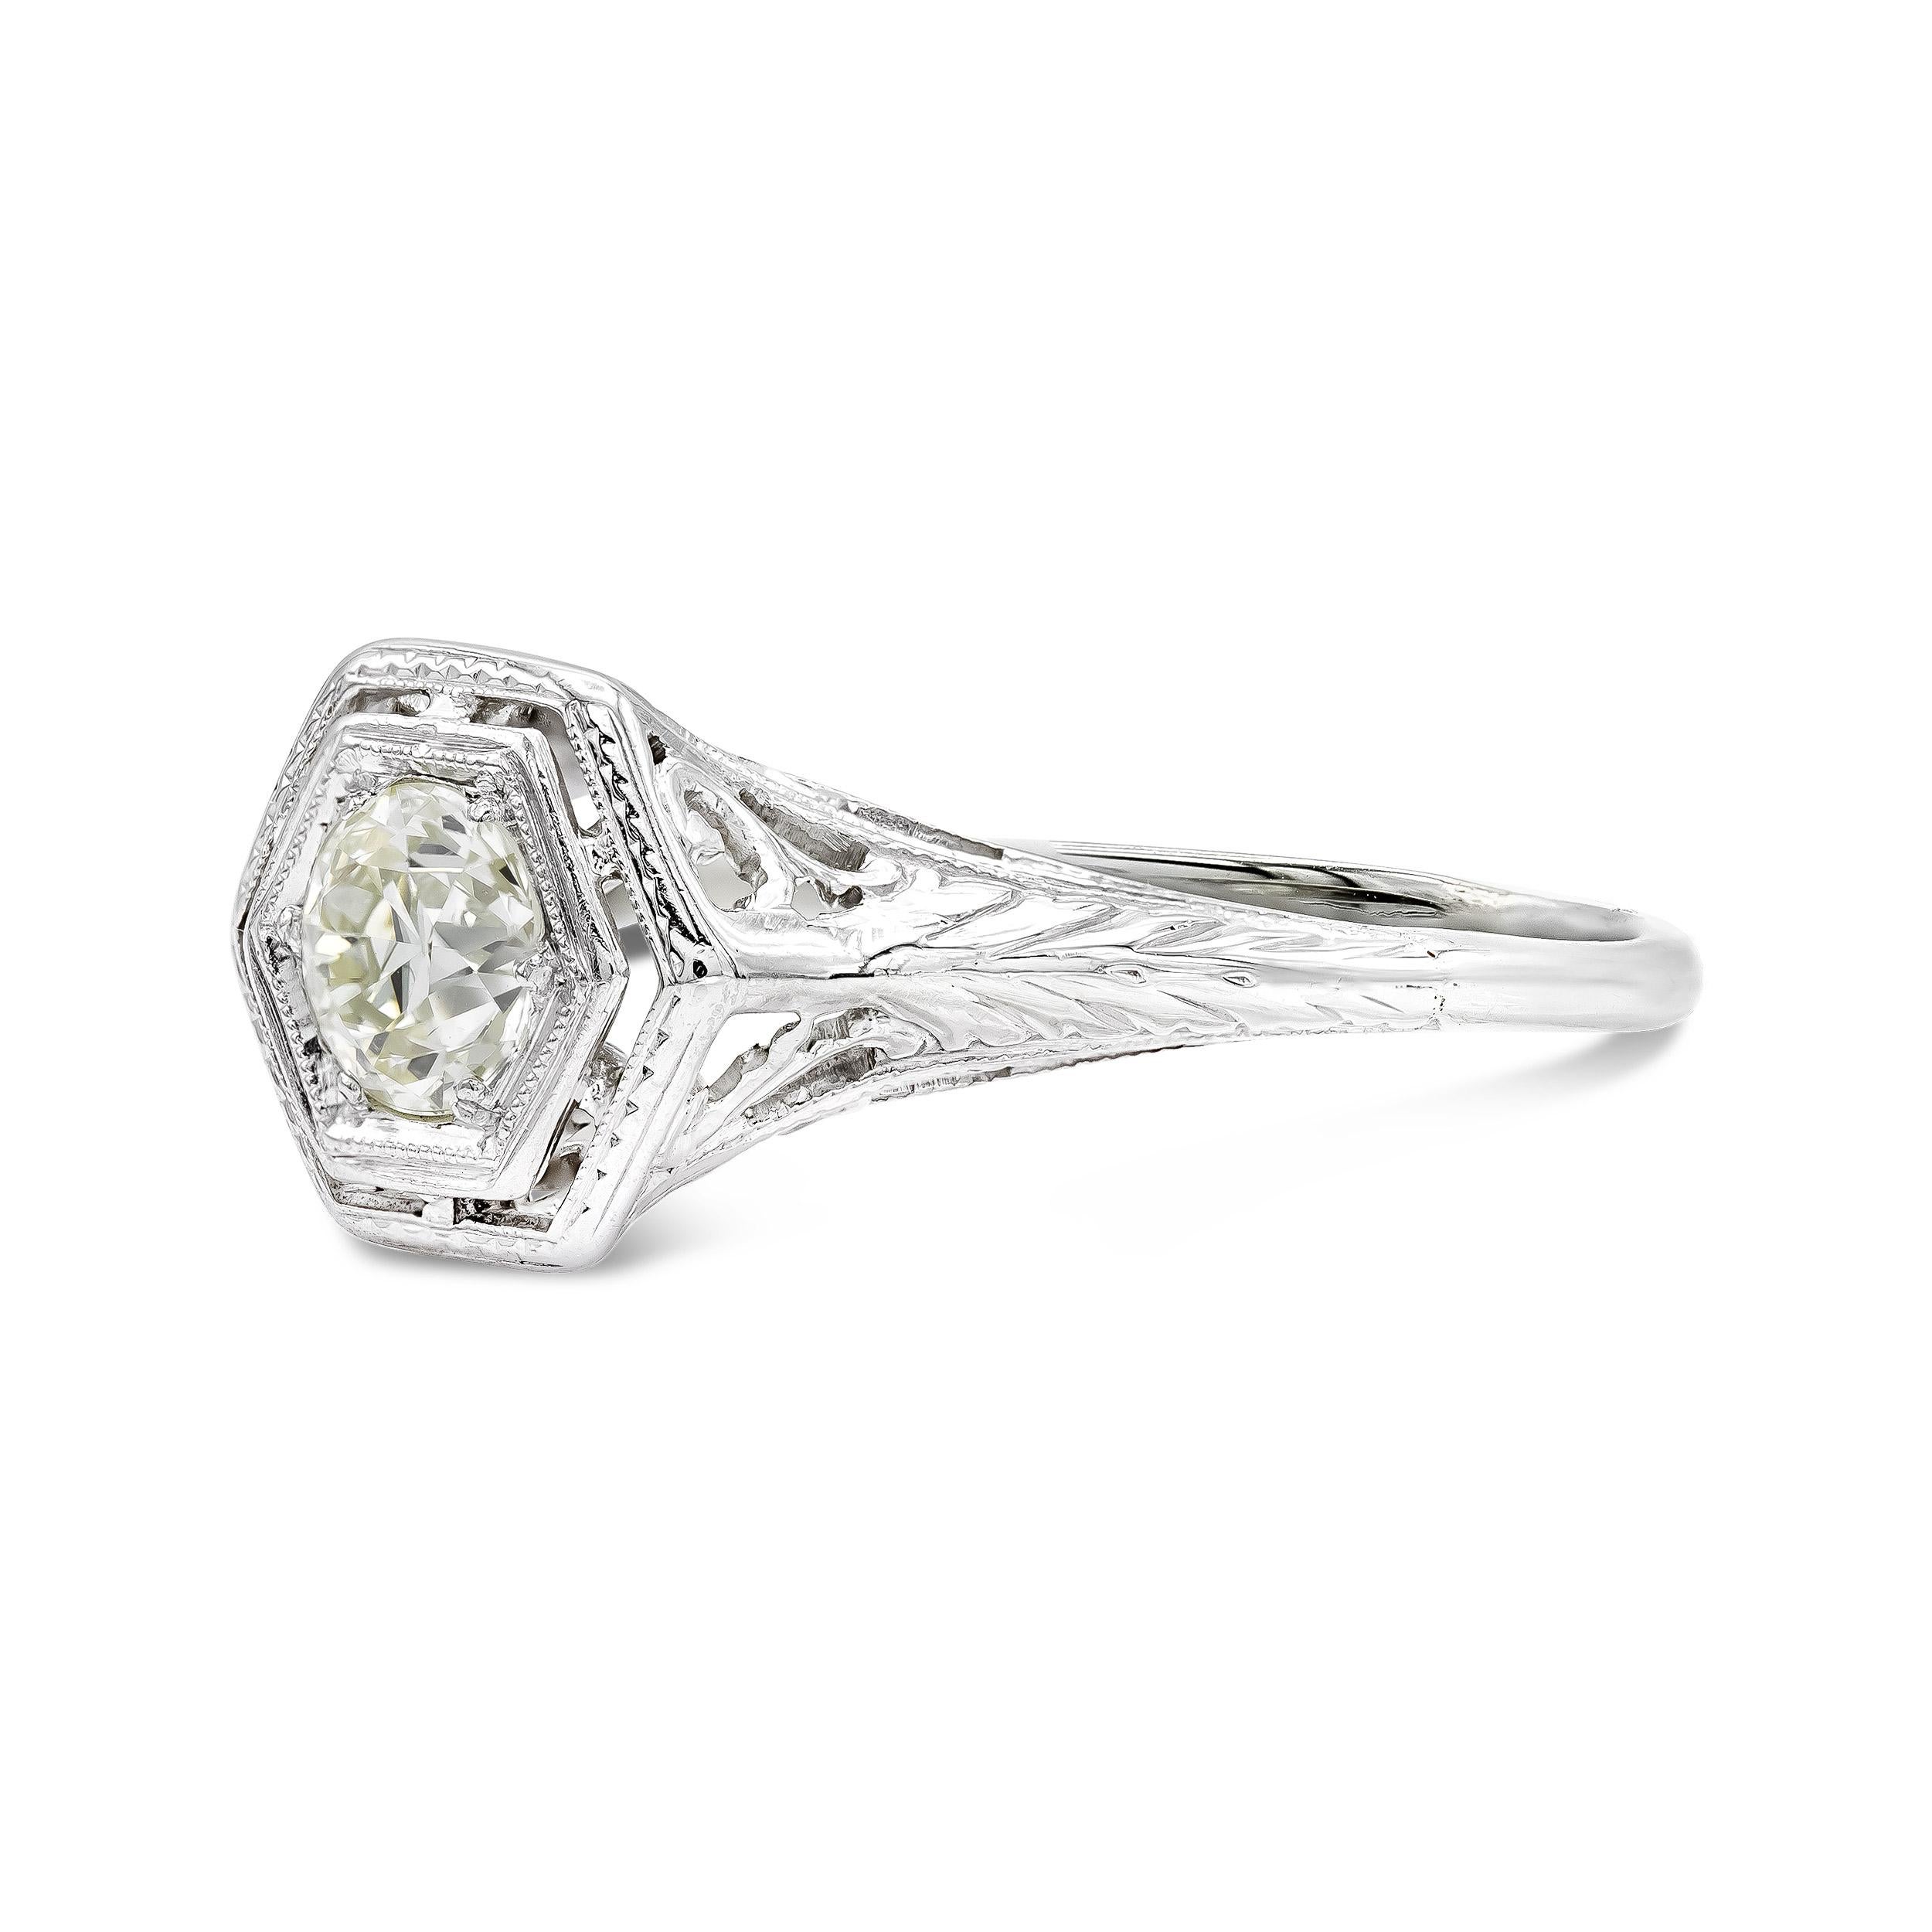 An Edwardian-era engagement ring that proves solitaire settings are anything but simple. Twinkling from the center is a bead-set old European cut diamond in an octagonal setting. The ring is enhanced by the most enchanting pierced filigree design